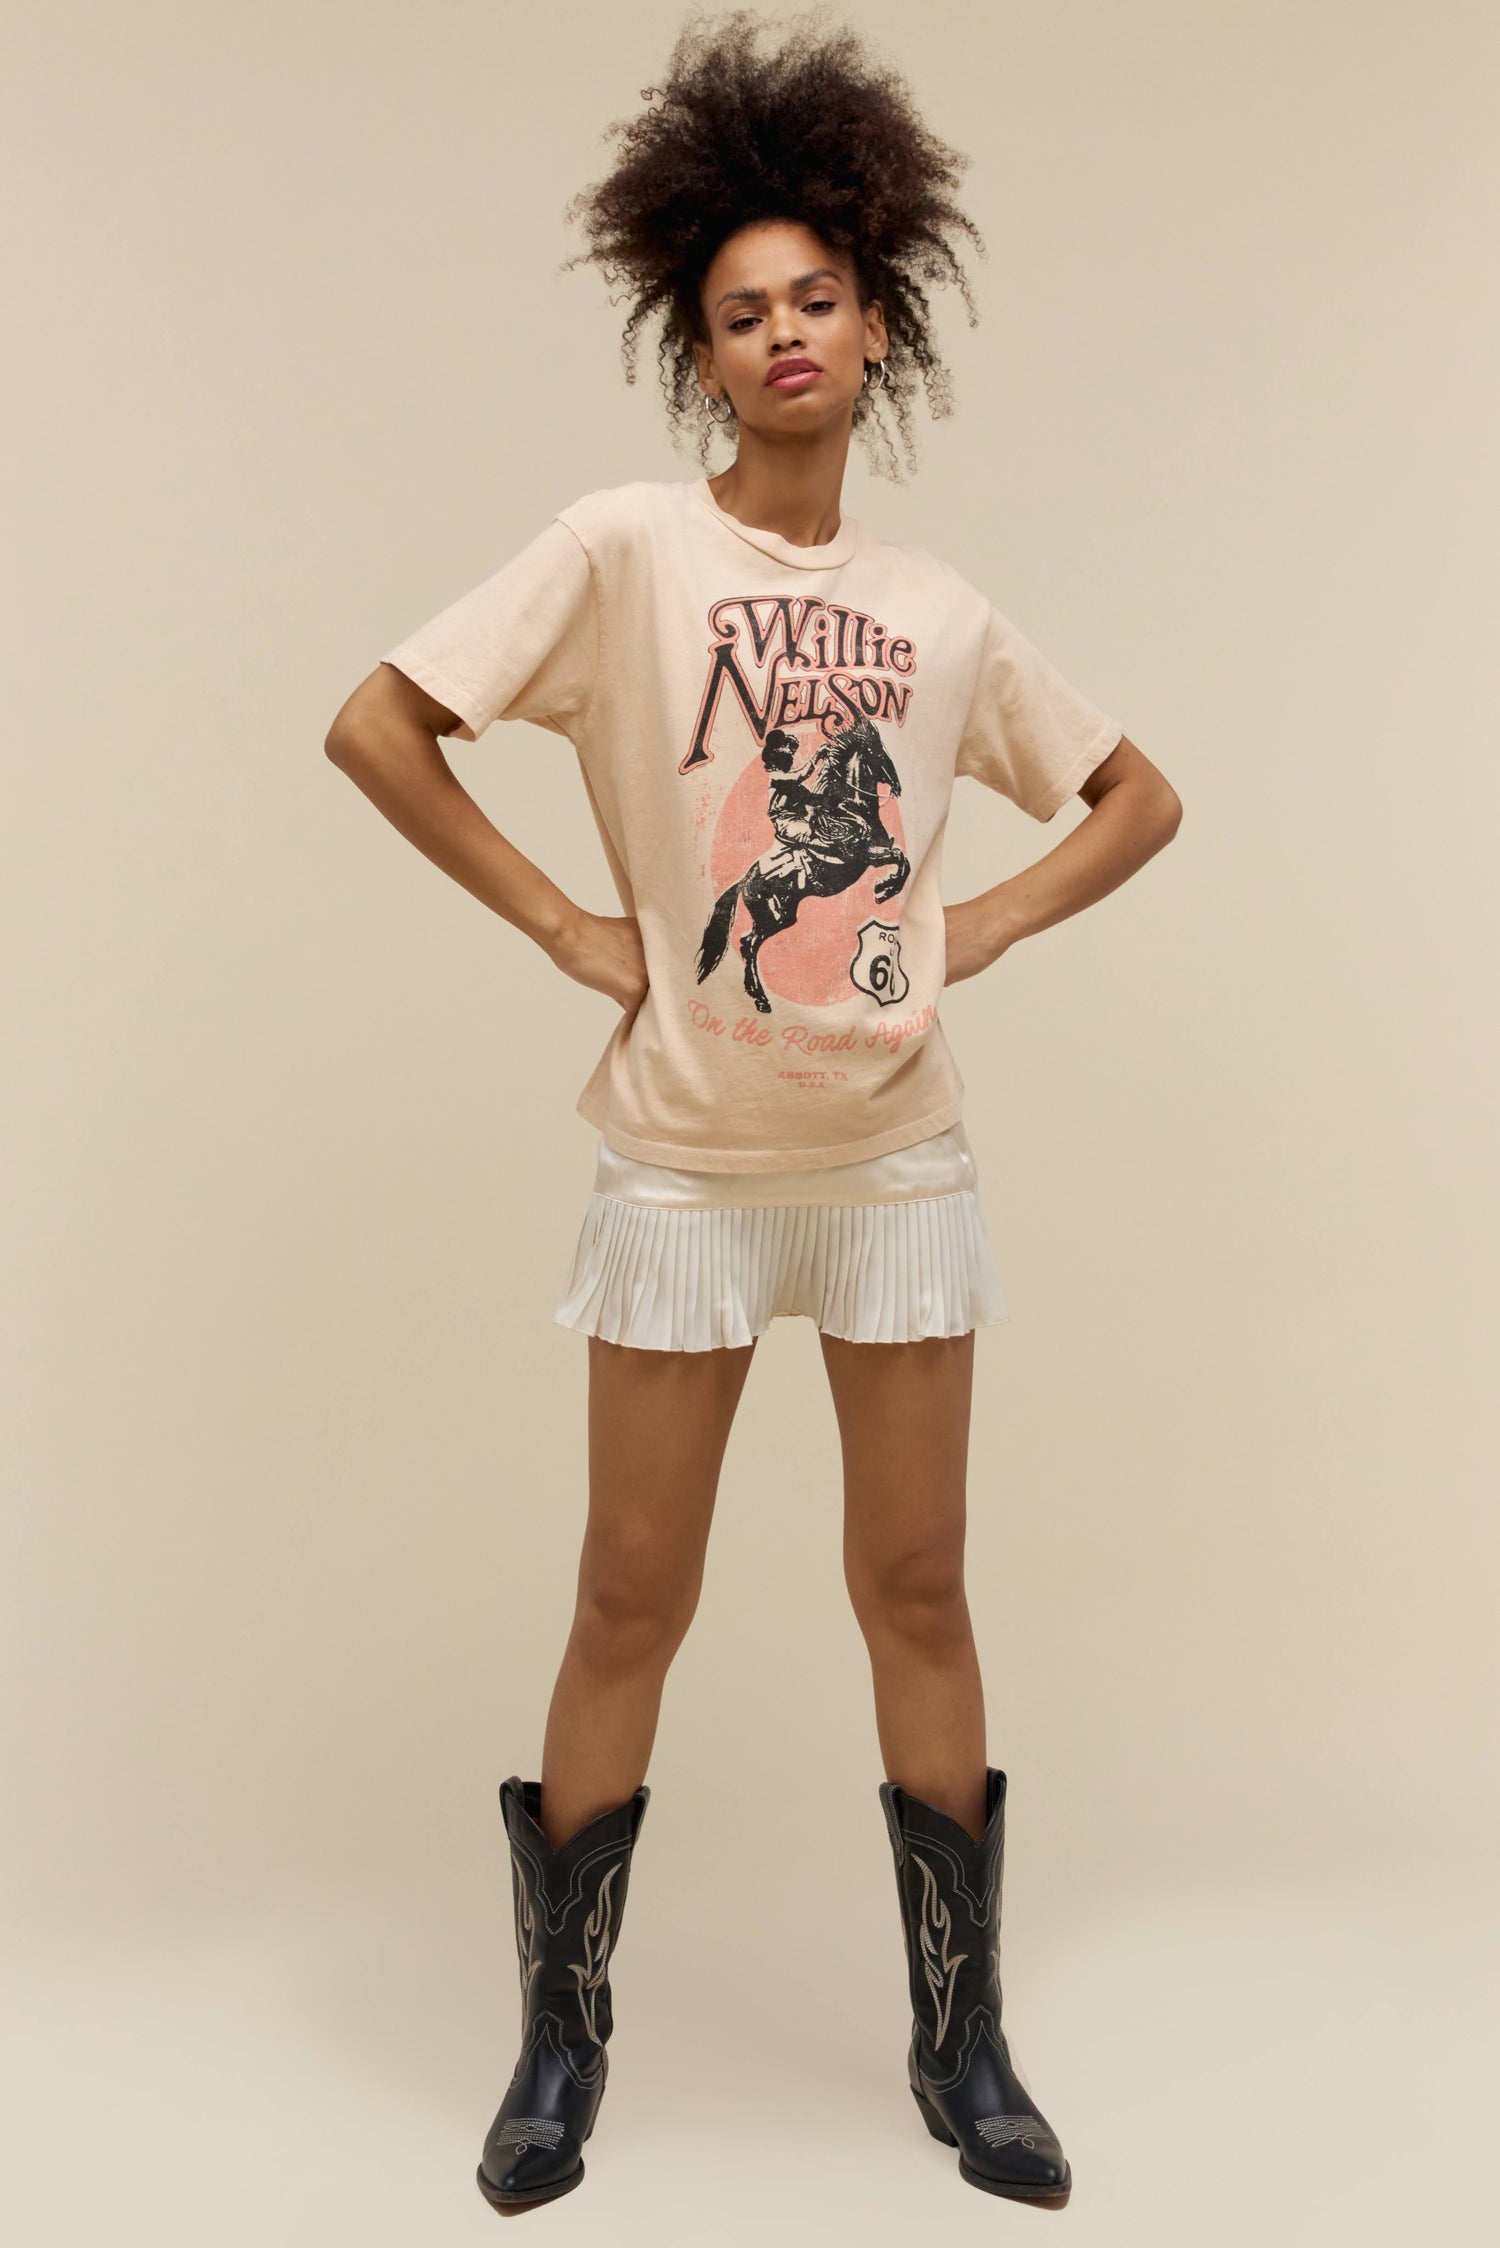 A model featuring a sand colored weekend tee stamped with Willie Nelson and his route 66 album cover.